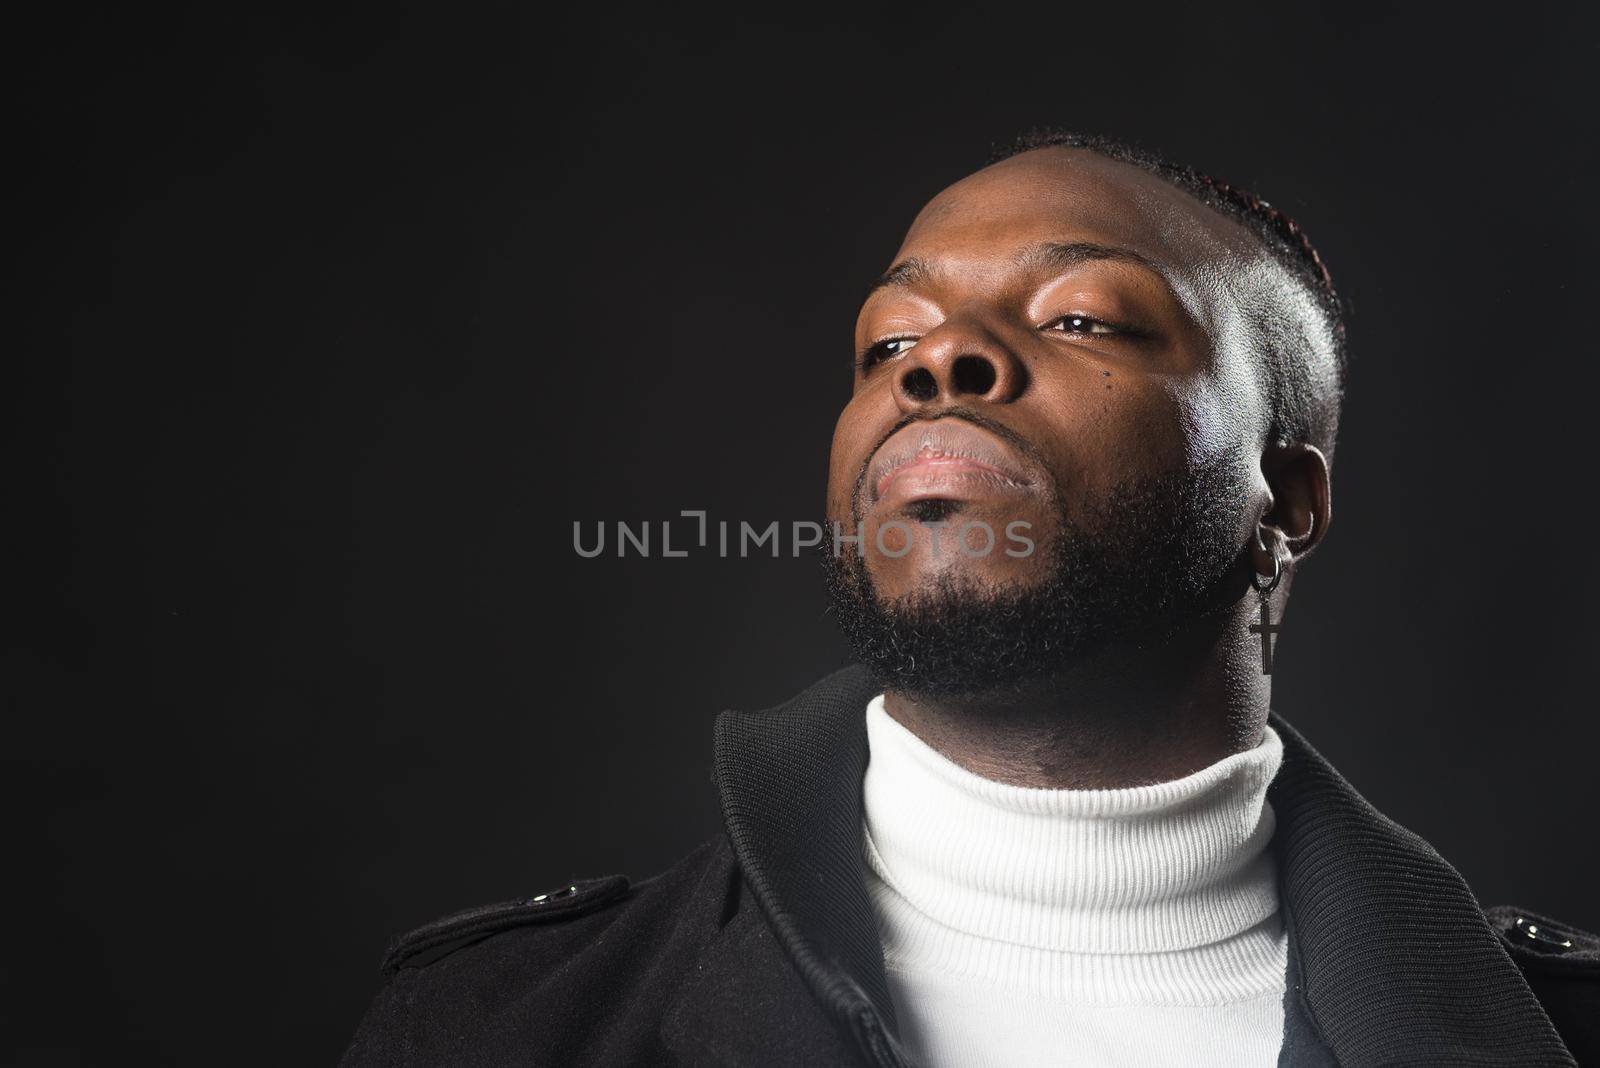 Black man with serious and sad look. Close up. Black background.